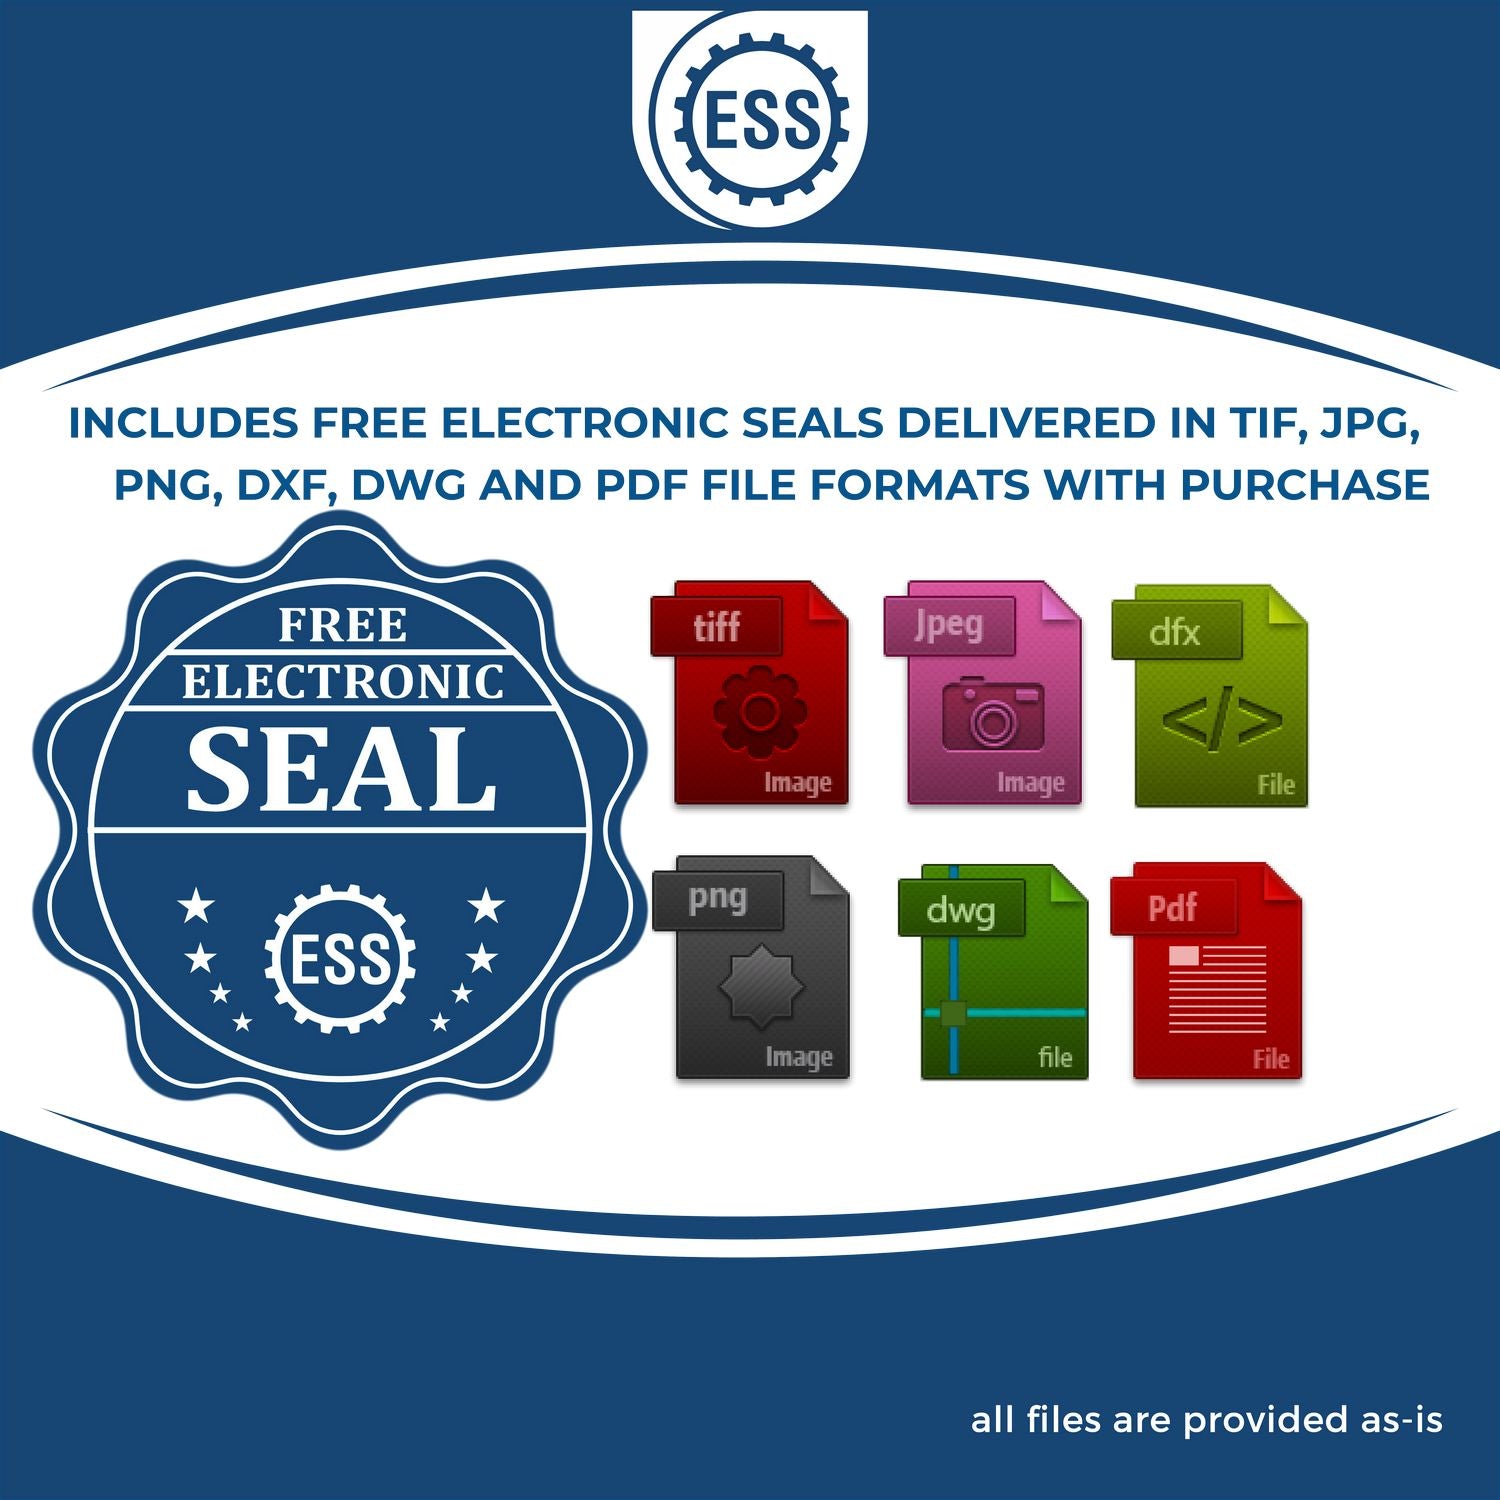 An infographic for the free electronic seal for the Nevada Professional Engineer Seal Stamp illustrating the different file type icons such as DXF, DWG, TIF, JPG and PNG.